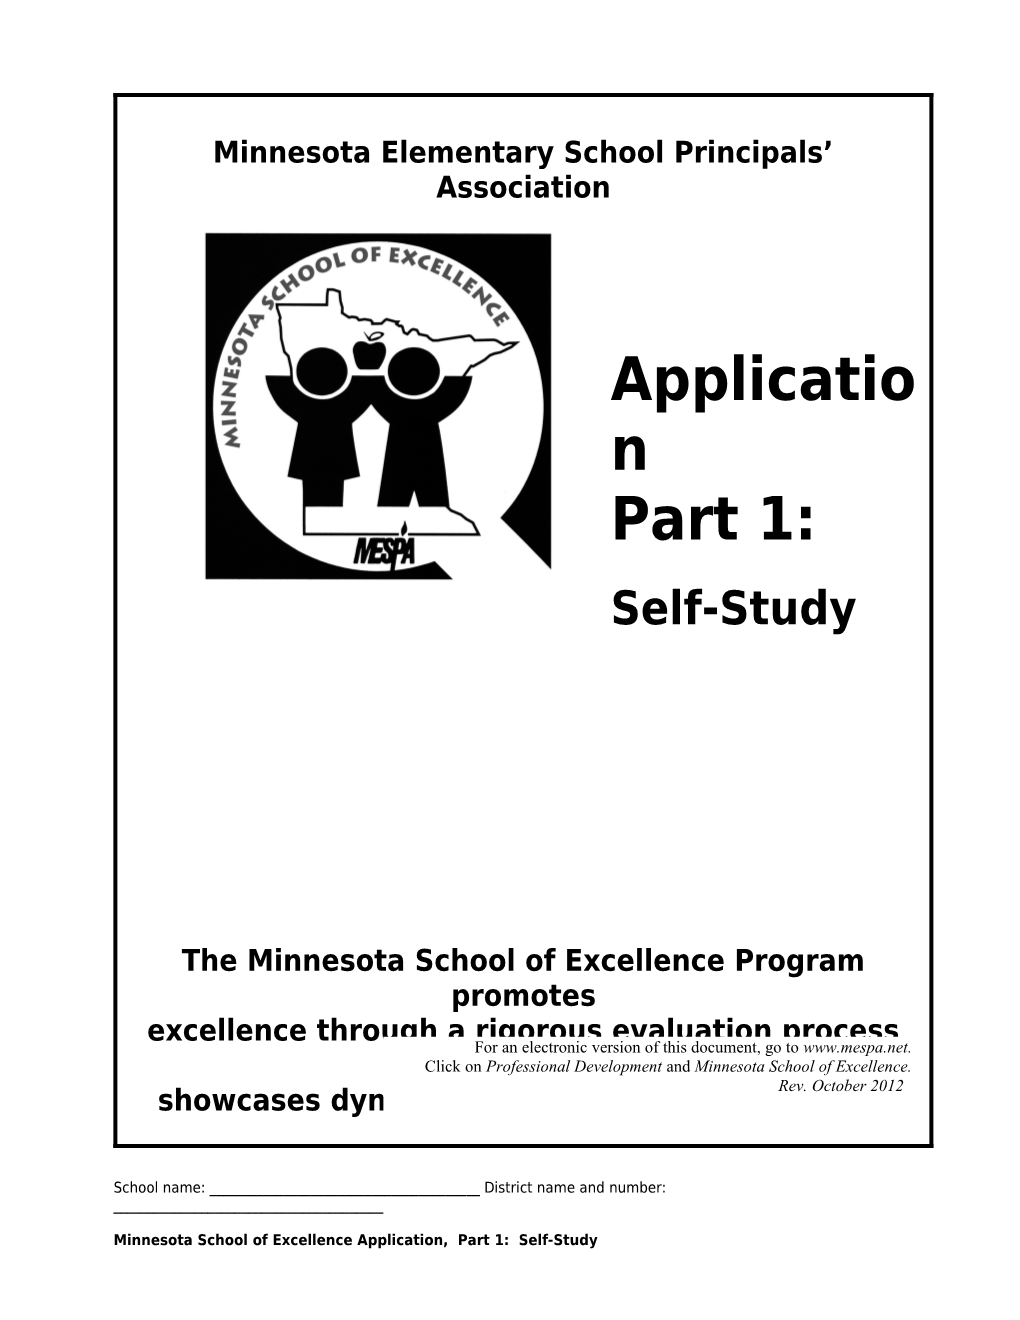 Minnesota School of Excellence Guidelines